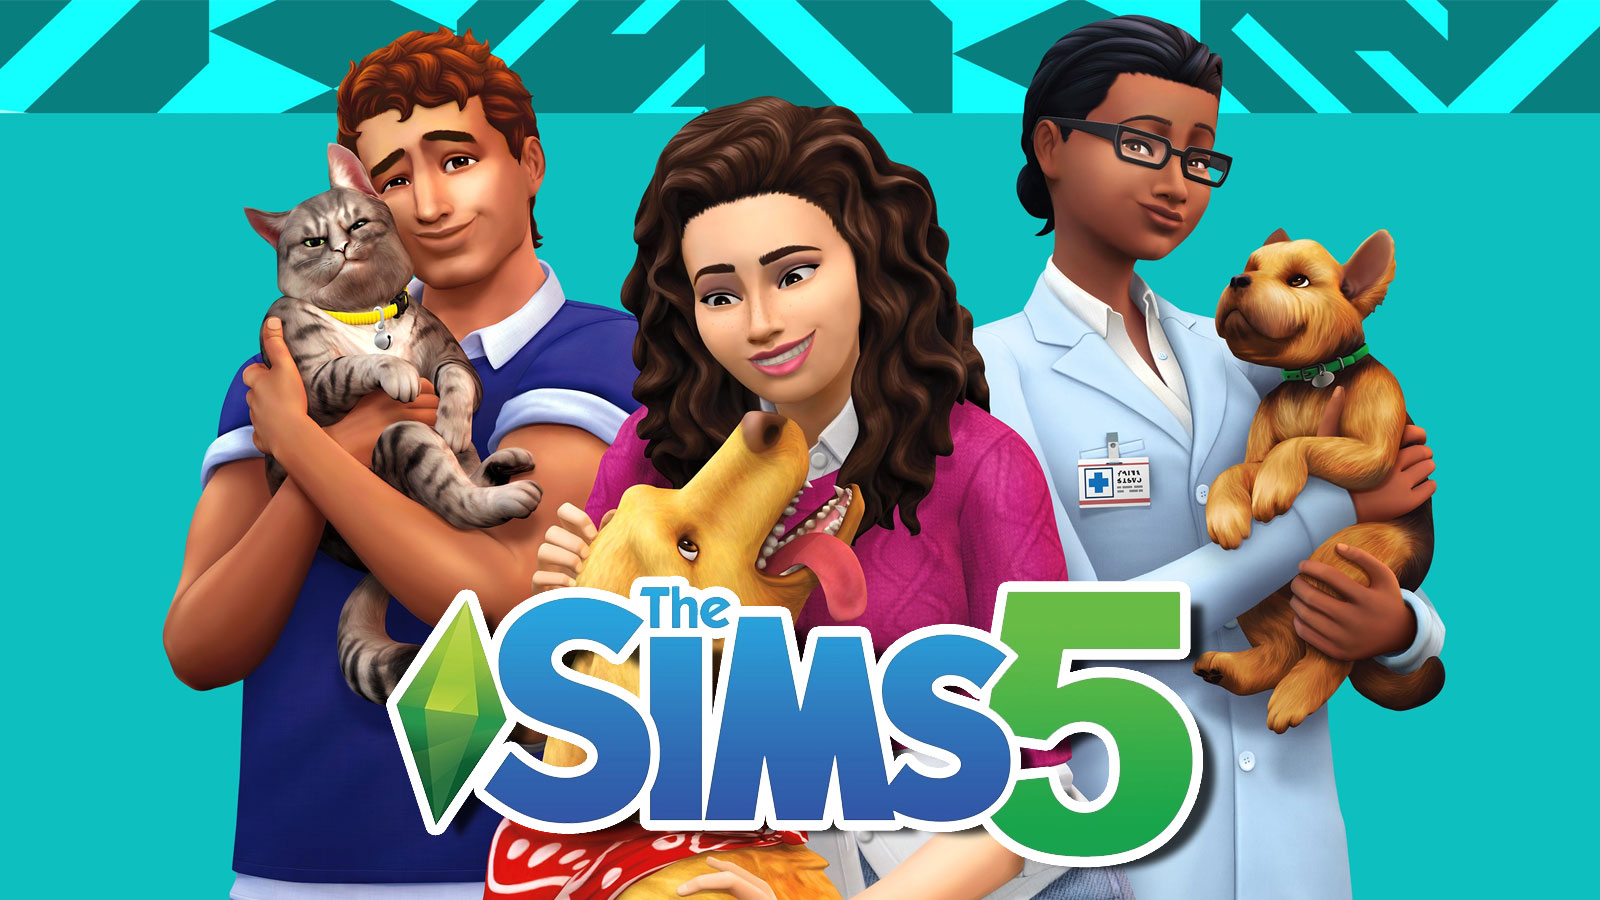 The Sims 5 Release Date, Gameplay, Rumors New TS4 Content hints on 2022 Game Launch